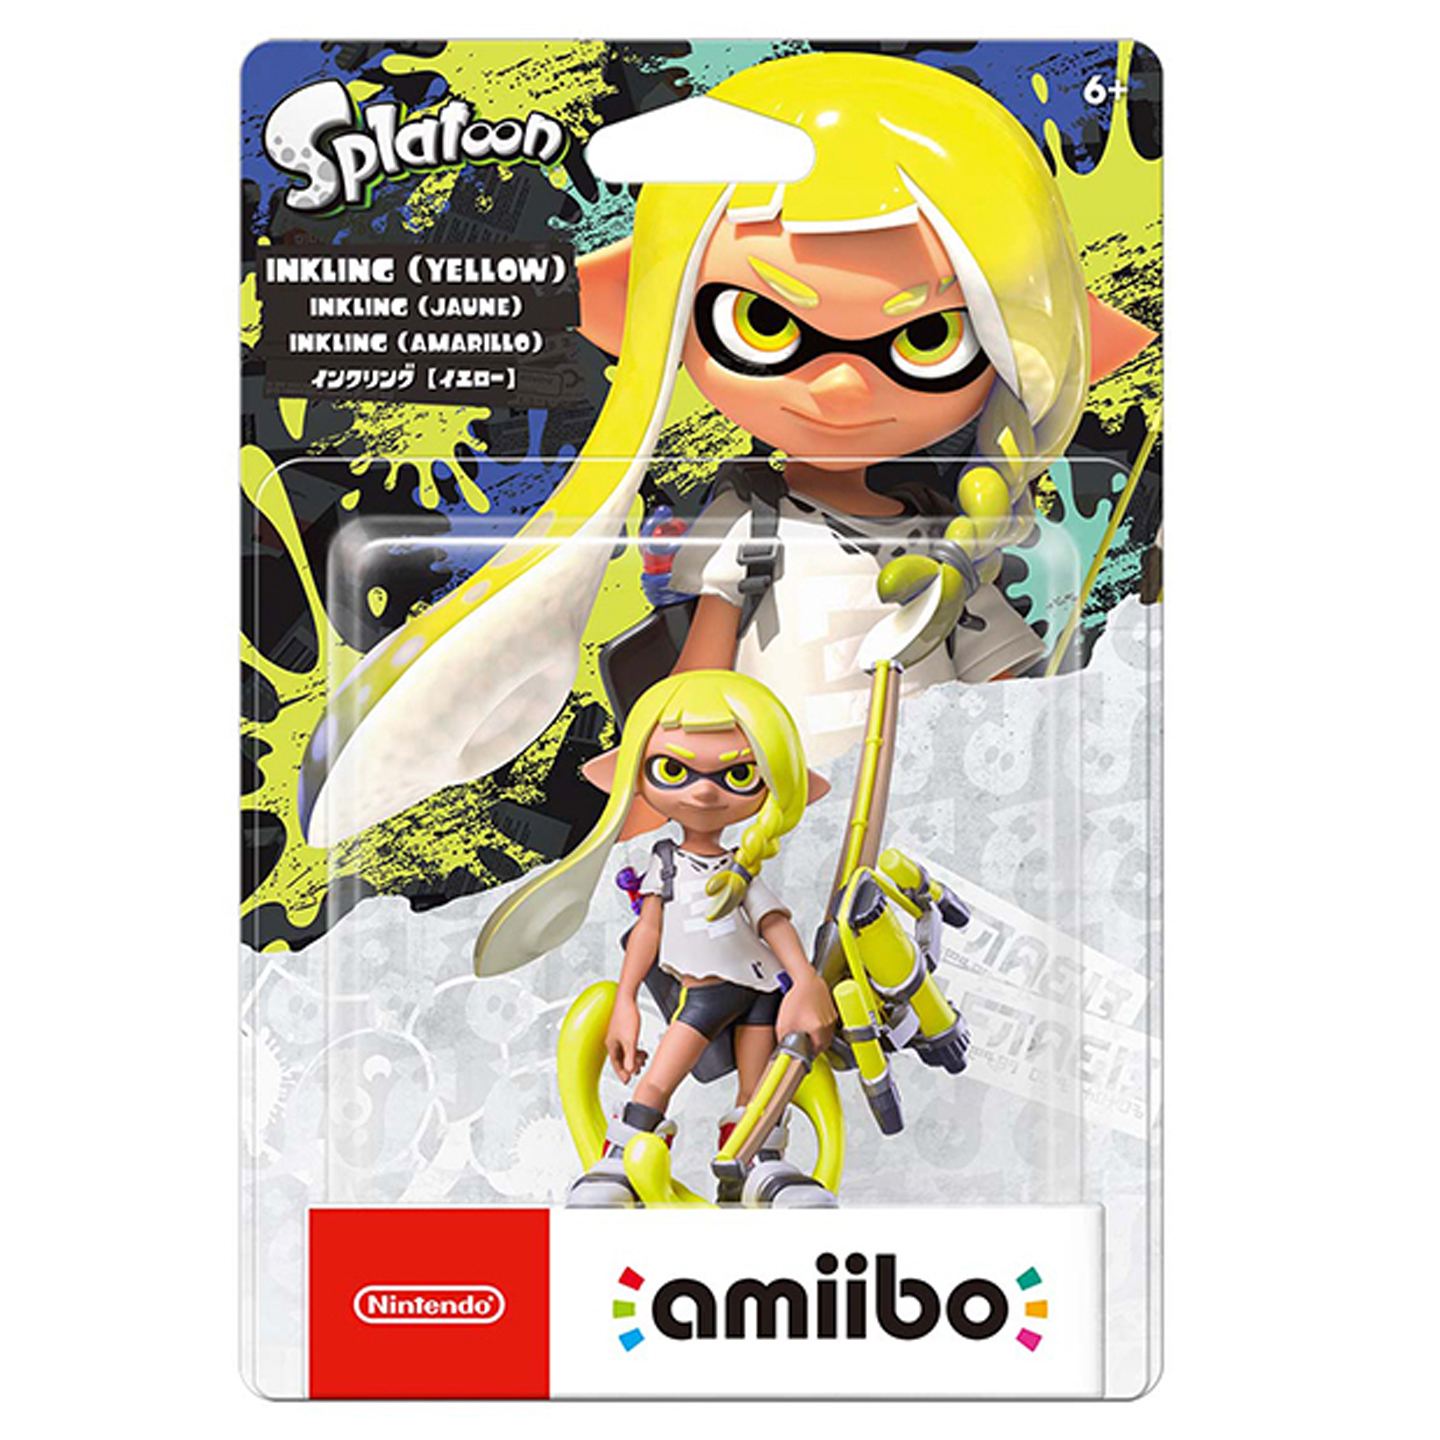 amiibo Splatoon 3 Series (Inkling Yellow) for Wii U, New 3DS, New 3DS LL / XL, SW